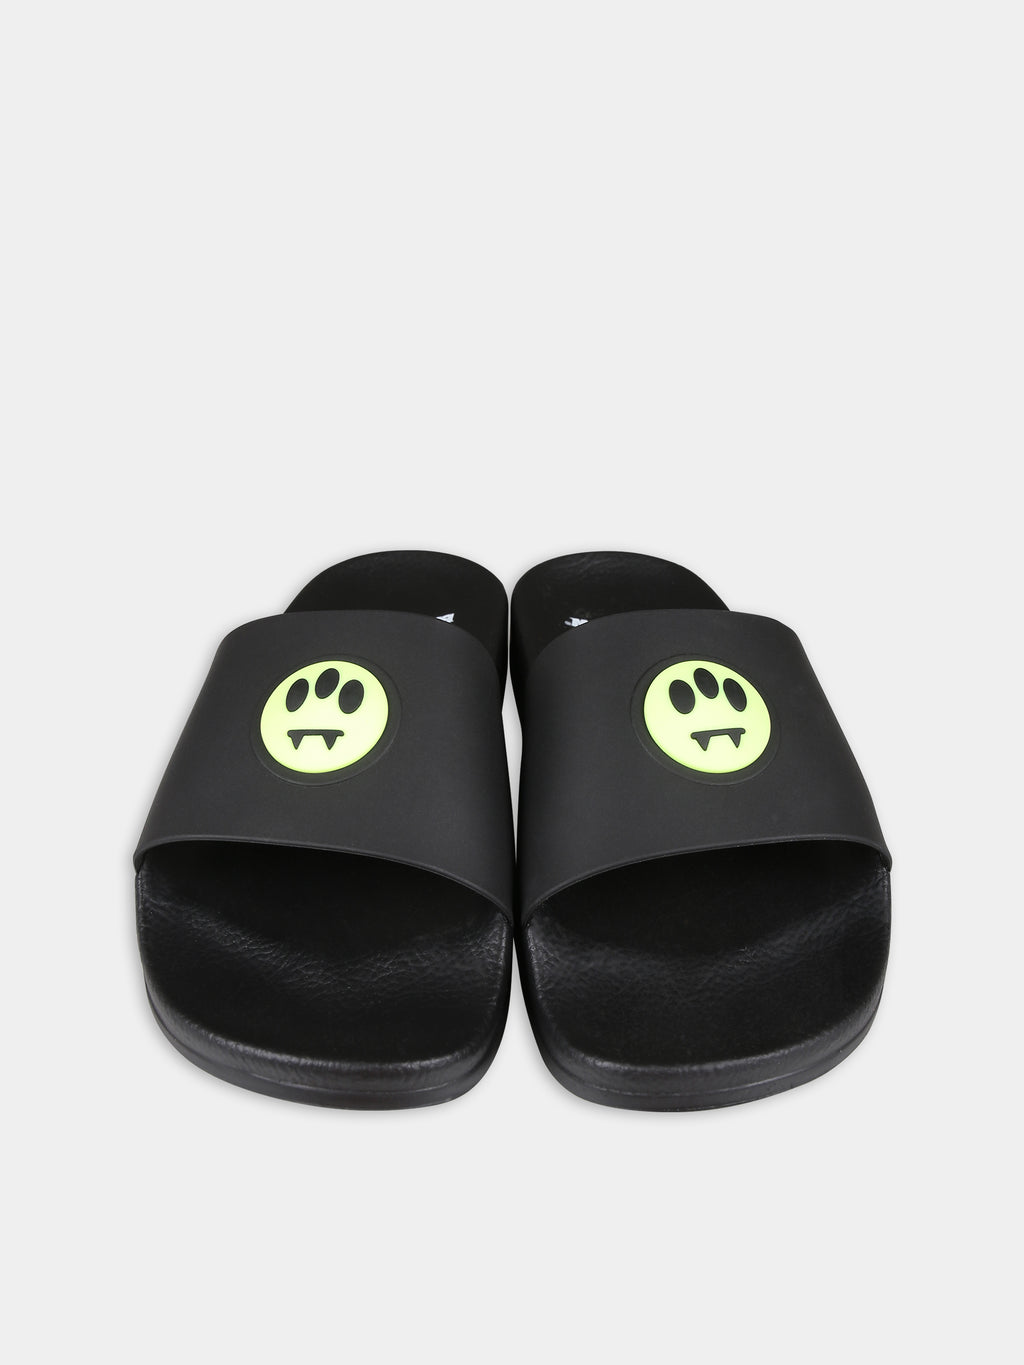 Black slippers for boy with smiley